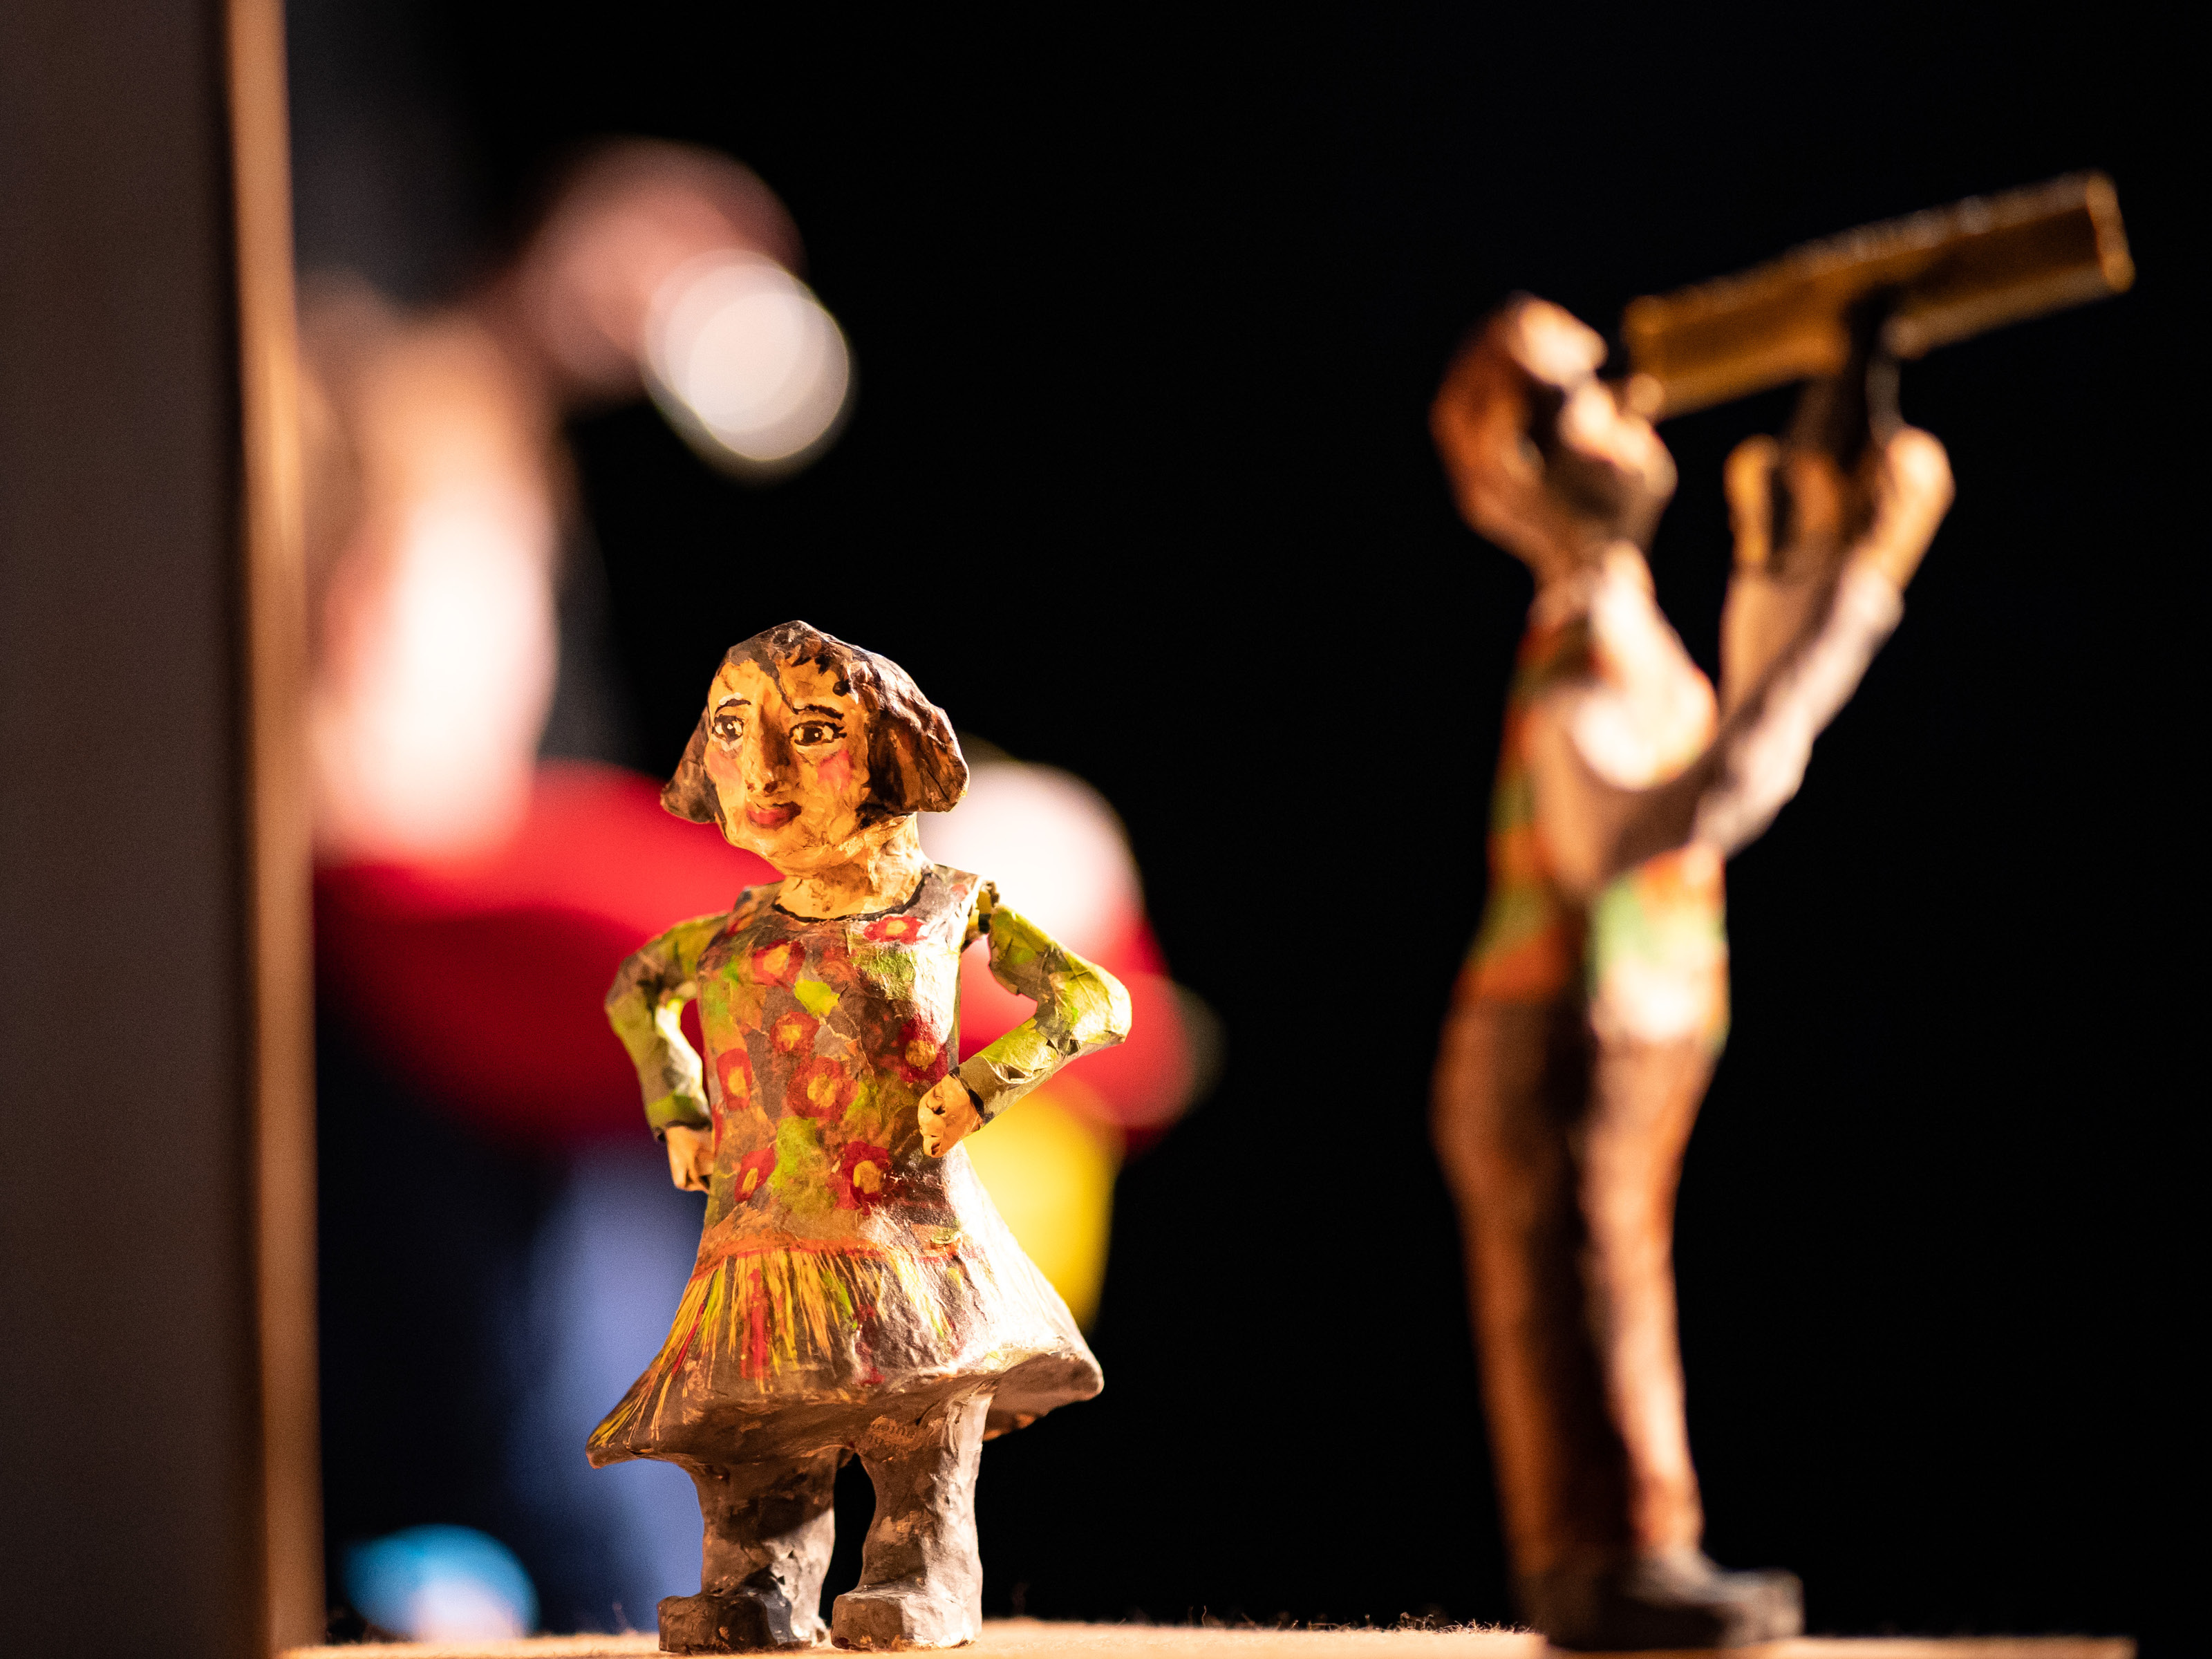 The clay figure of a little girl with a flowery dress and short brown hair looks past the viewer with her hands on her hips. In the background is a clay figure of a man with binoculars looking up at the sky.